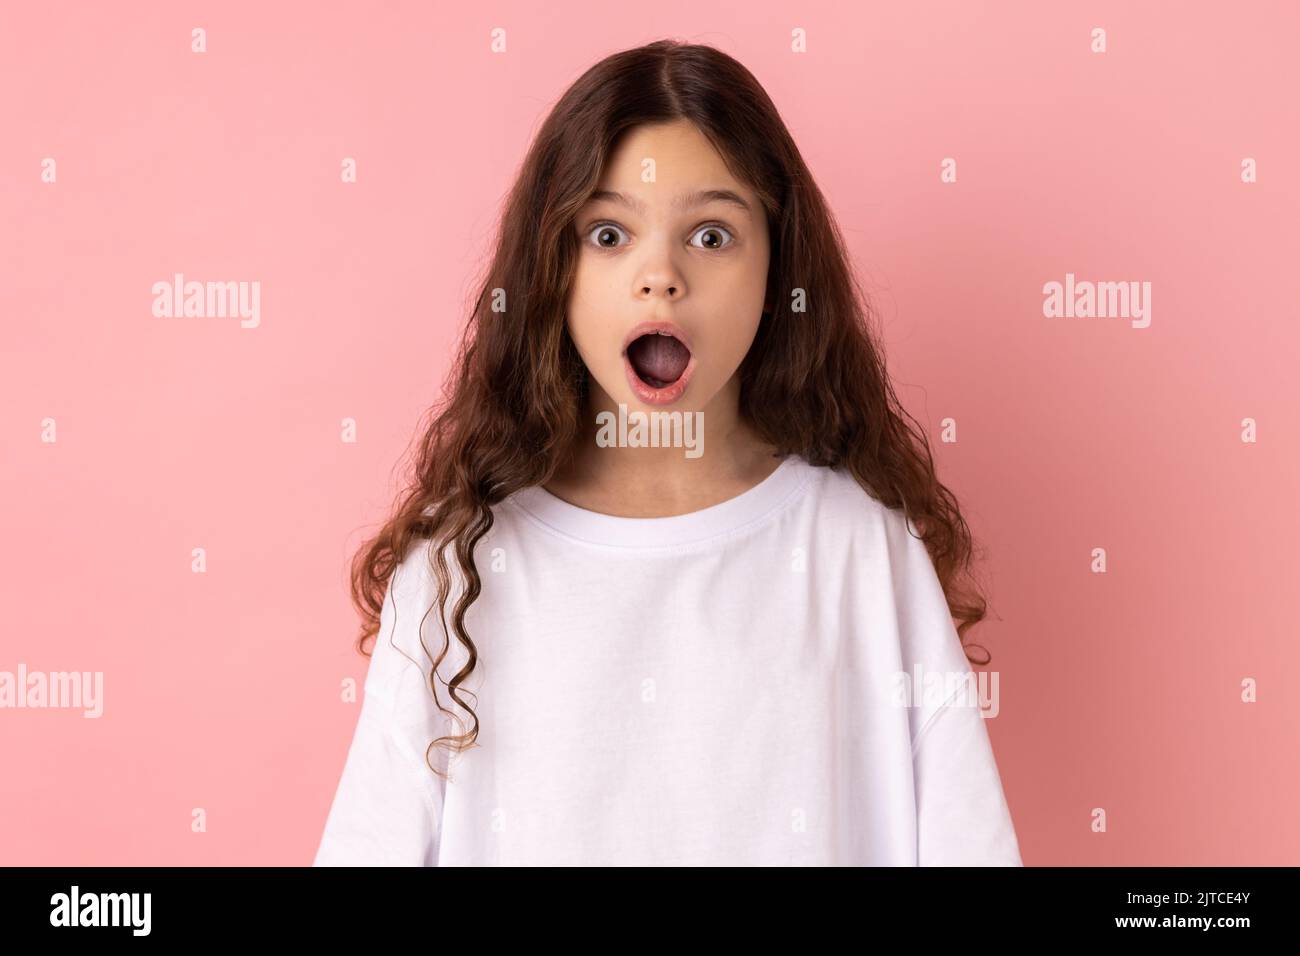 Portrait of surprised astonished little girl wearing white T-shirt looking at camera with open mouth and big eyes, sees something shocked. Indoor studio shot isolated on pink background. Stock Photo